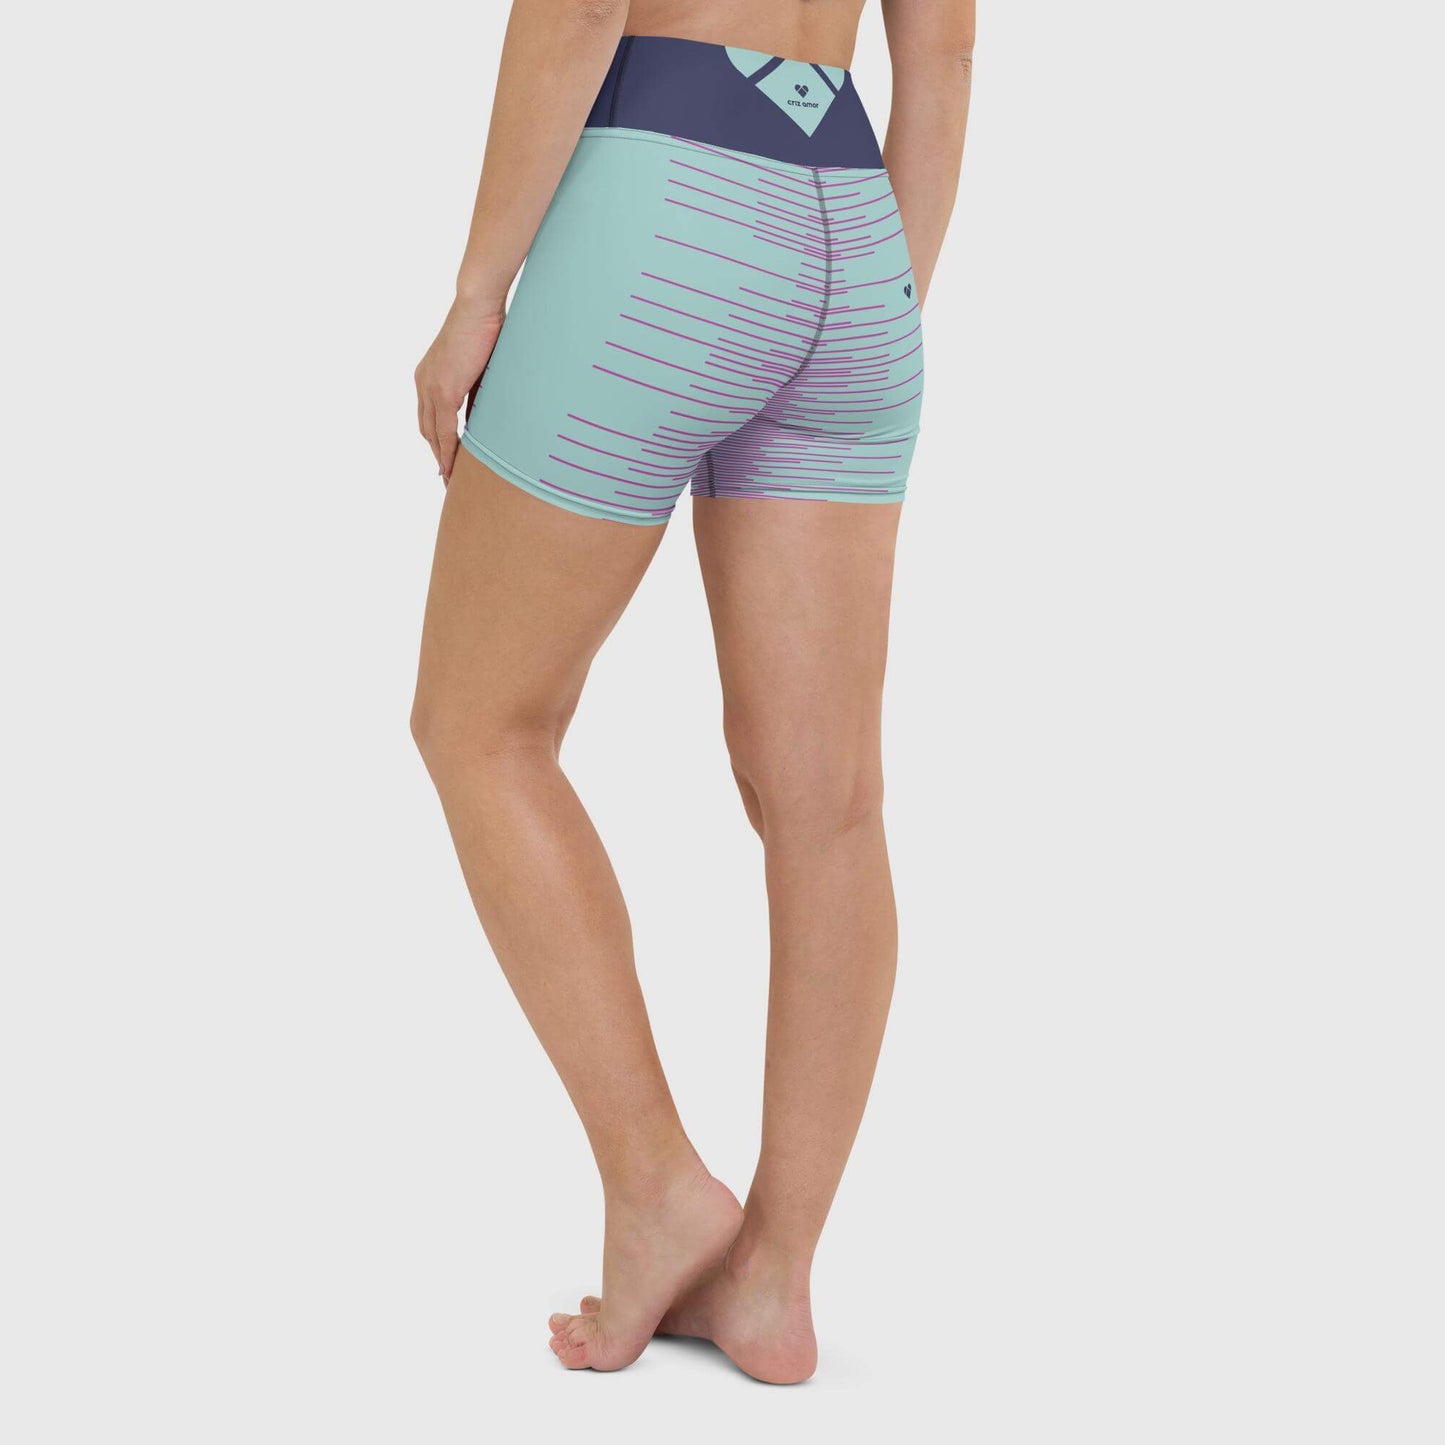 Mint and Pink Yoga Shorts - Women's Activewear